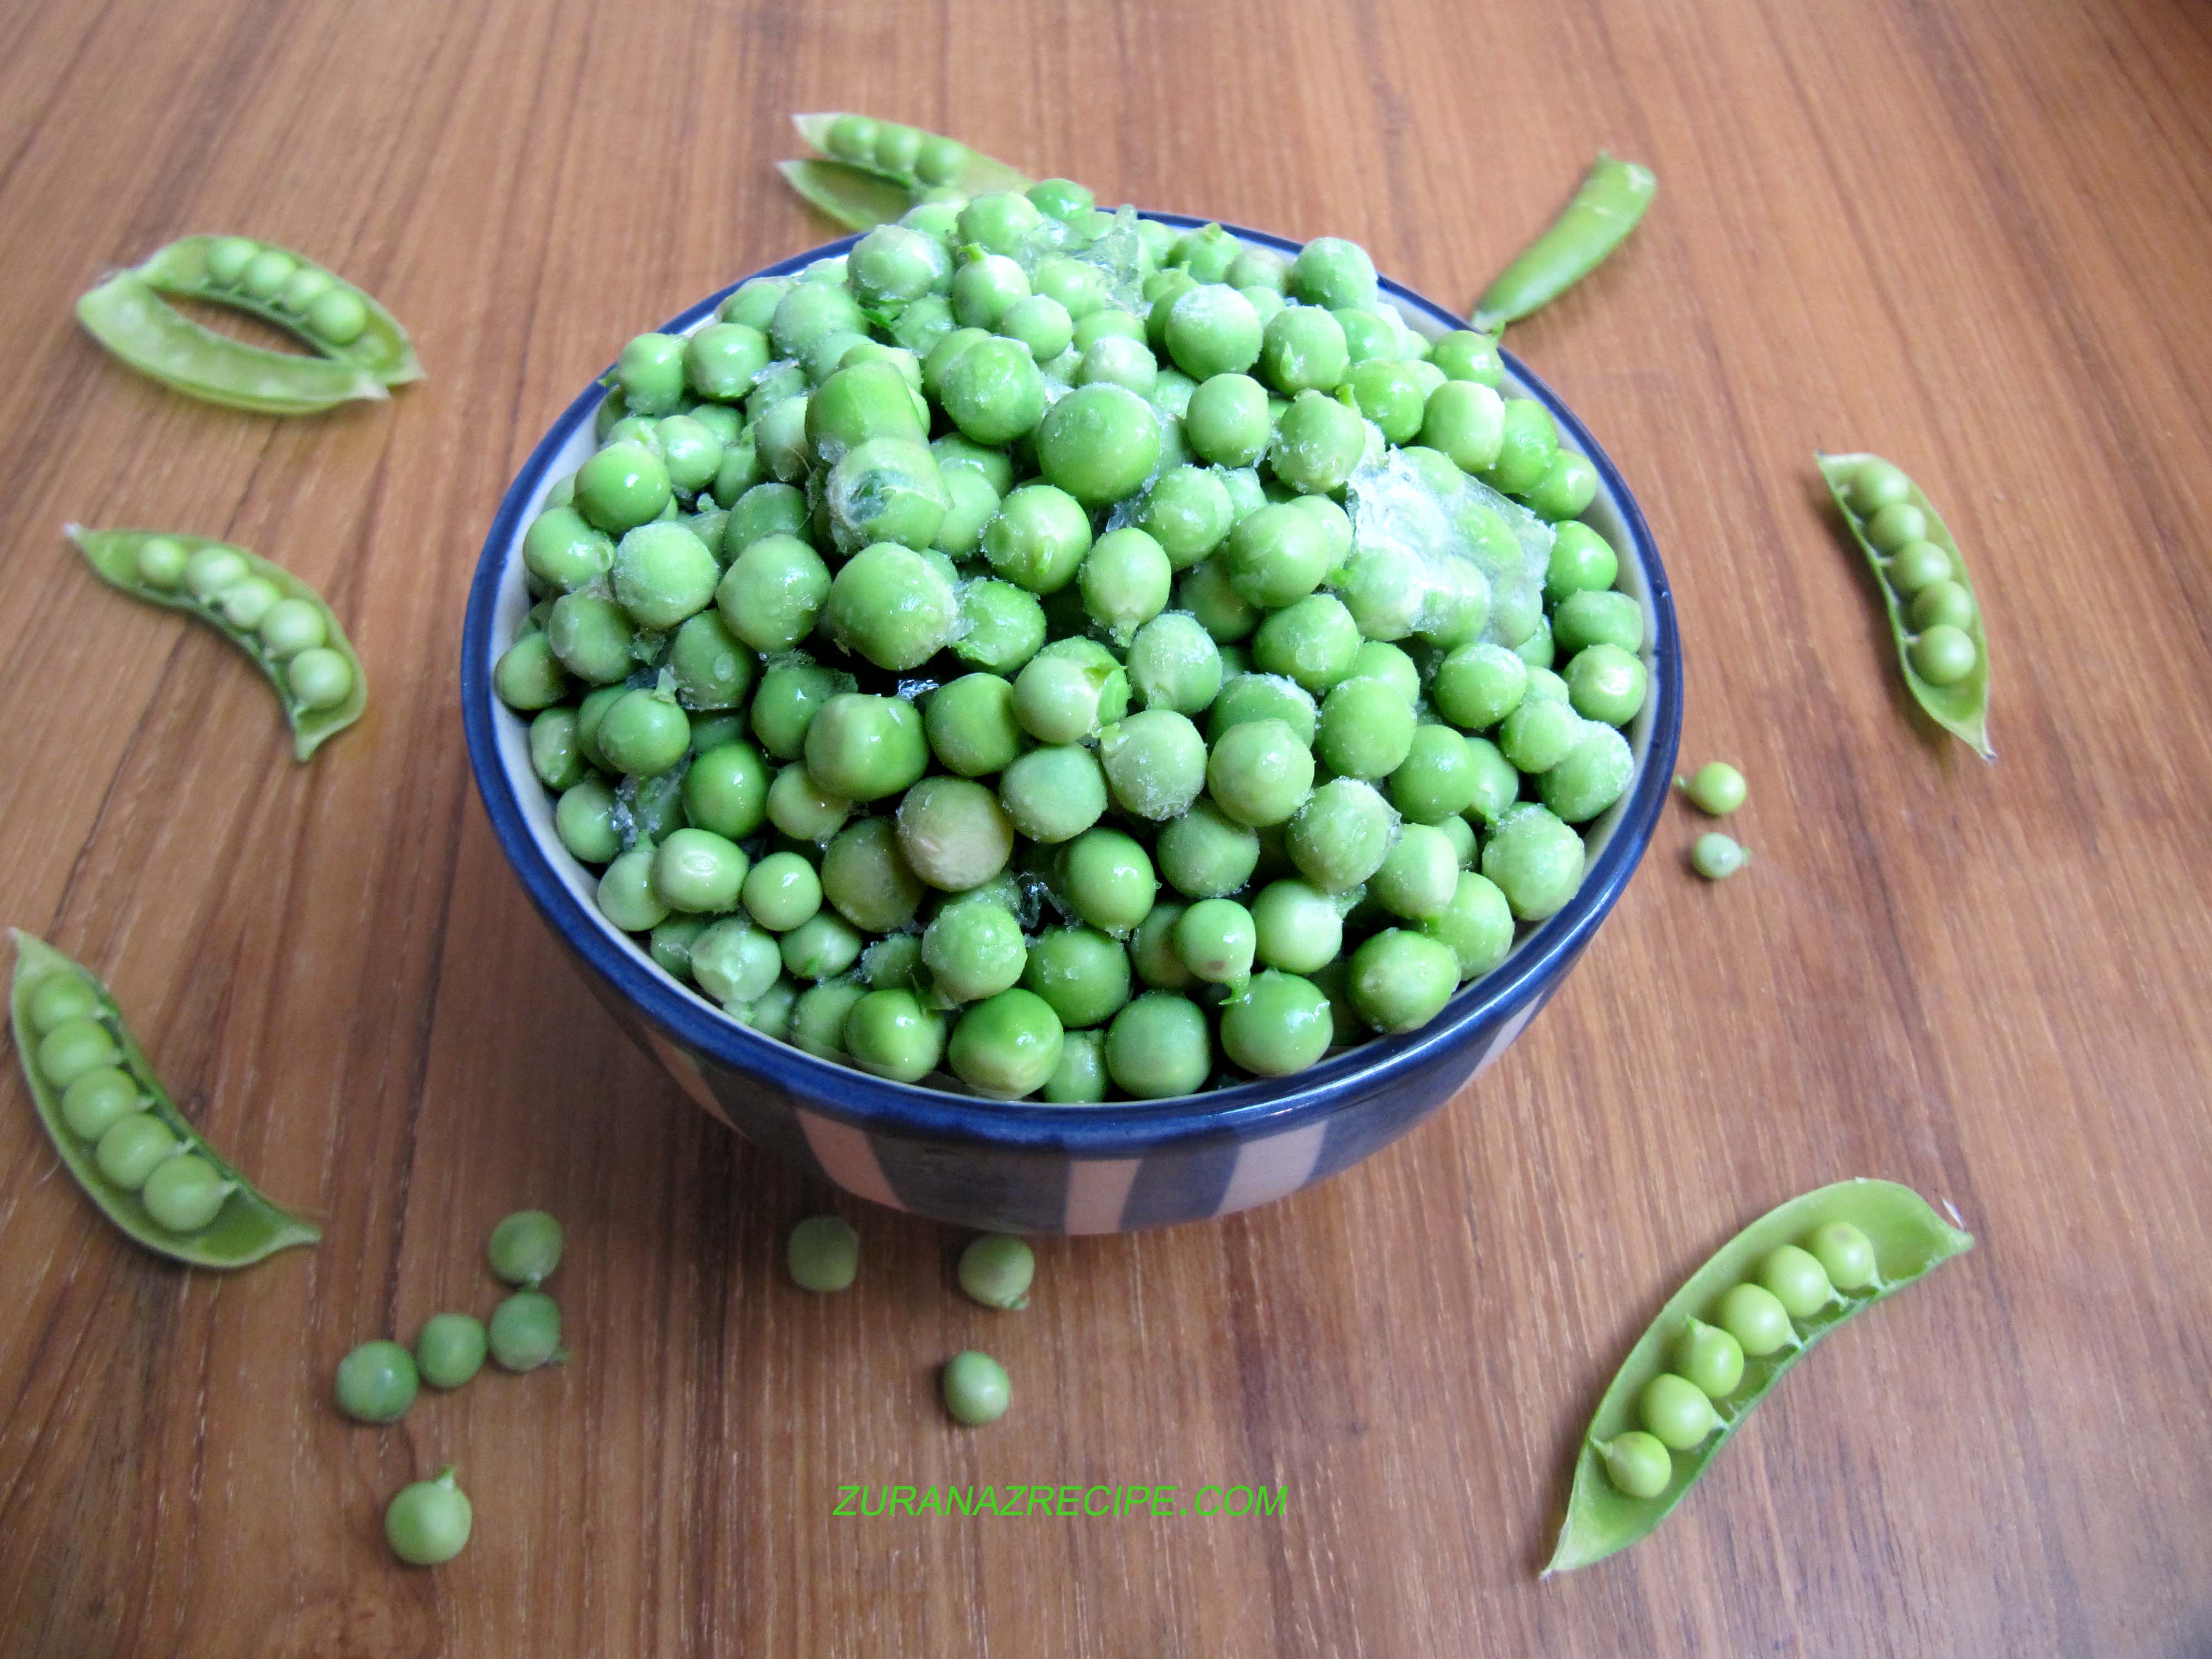 How to Preserve Green Peas/How to Frozen Green Peas